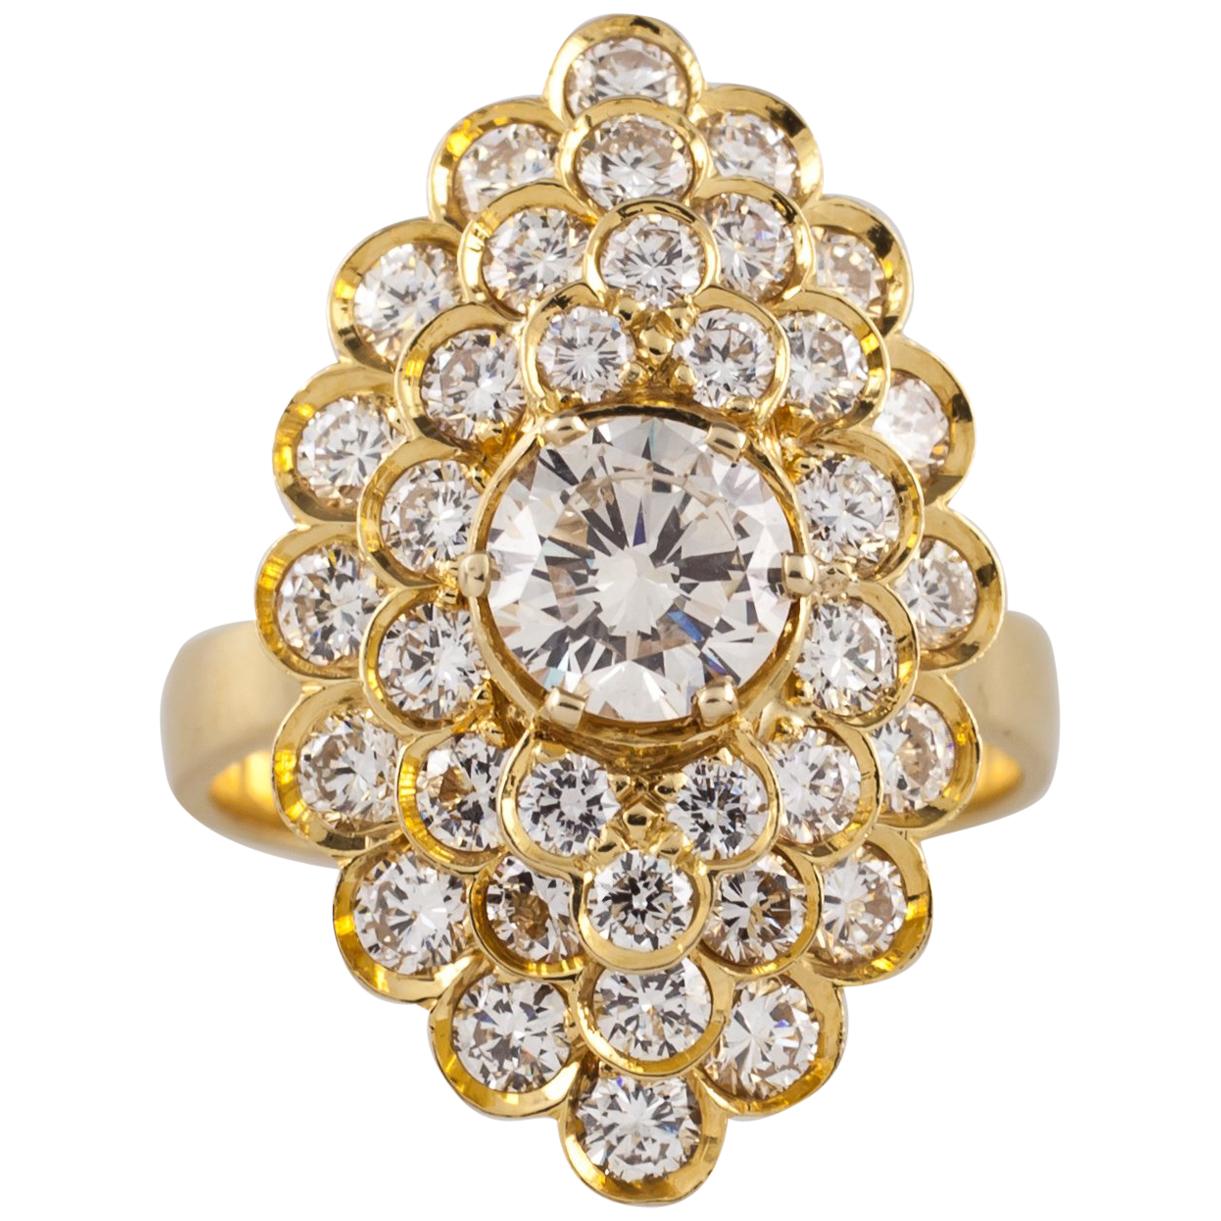 2.72 Carat Diamond Solitaire 18 Karat Gold Cluster Ring with GIA Certified